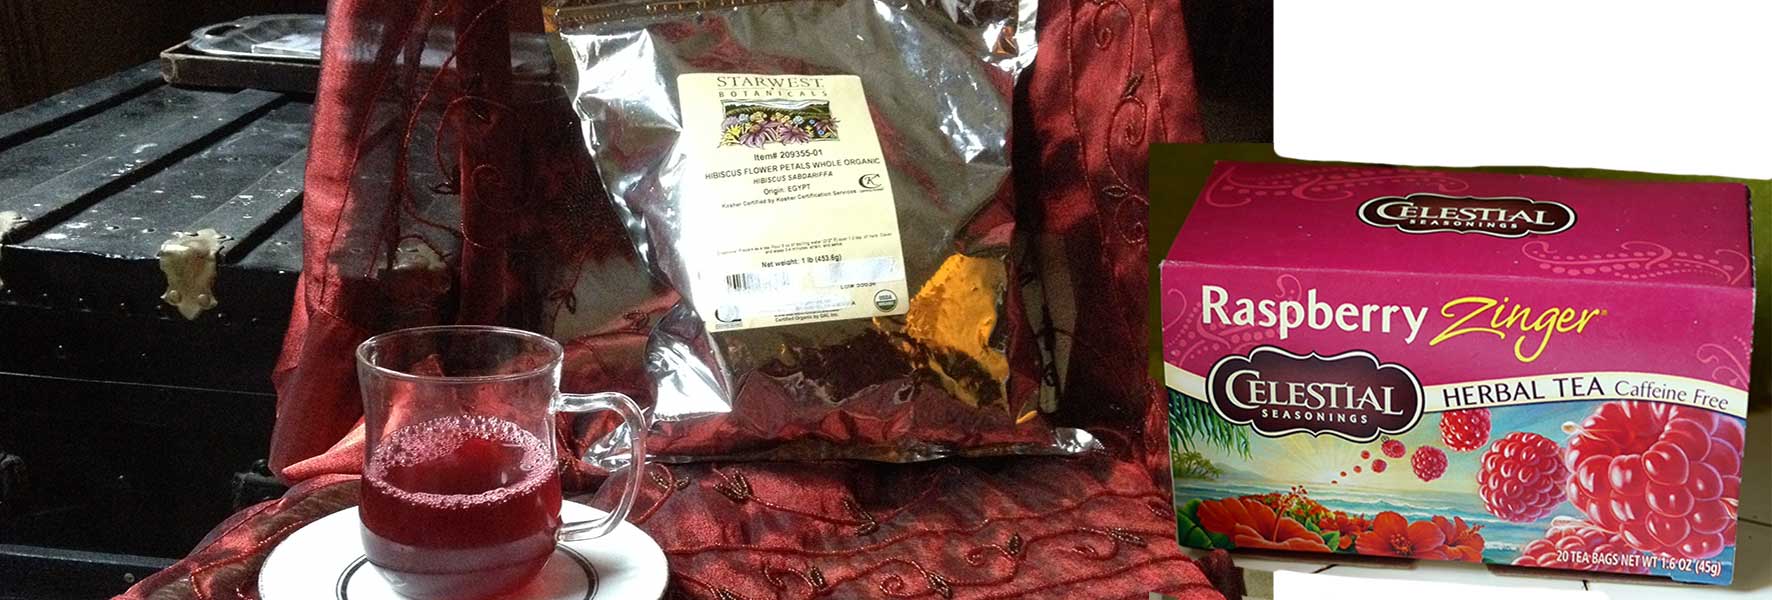  (left) cup of hibiscus tea with foil package of Starwest Botanicals dried hibiscus flowers (right) package Celestial Seasonings Raspberry Zinger herbal tea